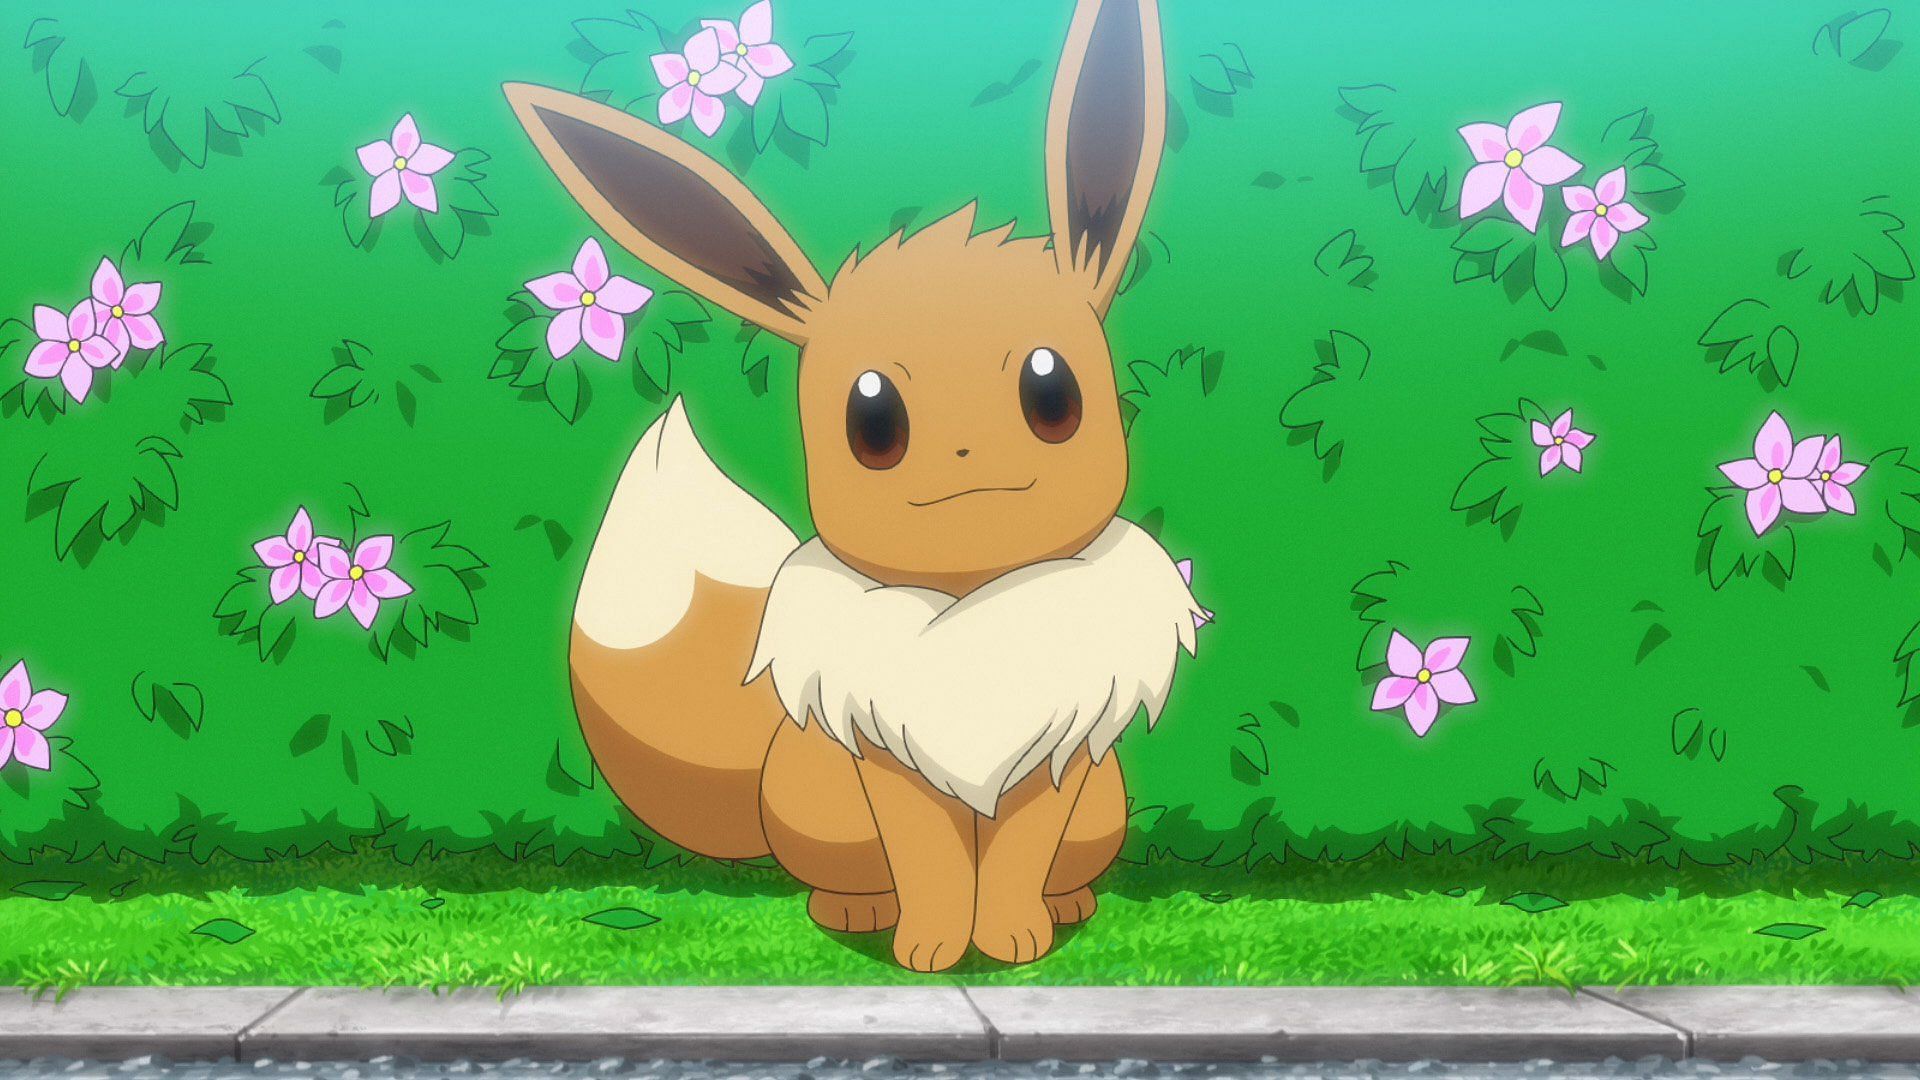 The cute Eevee (Image credits: Pokemon Journeys, OLM Incorporated)